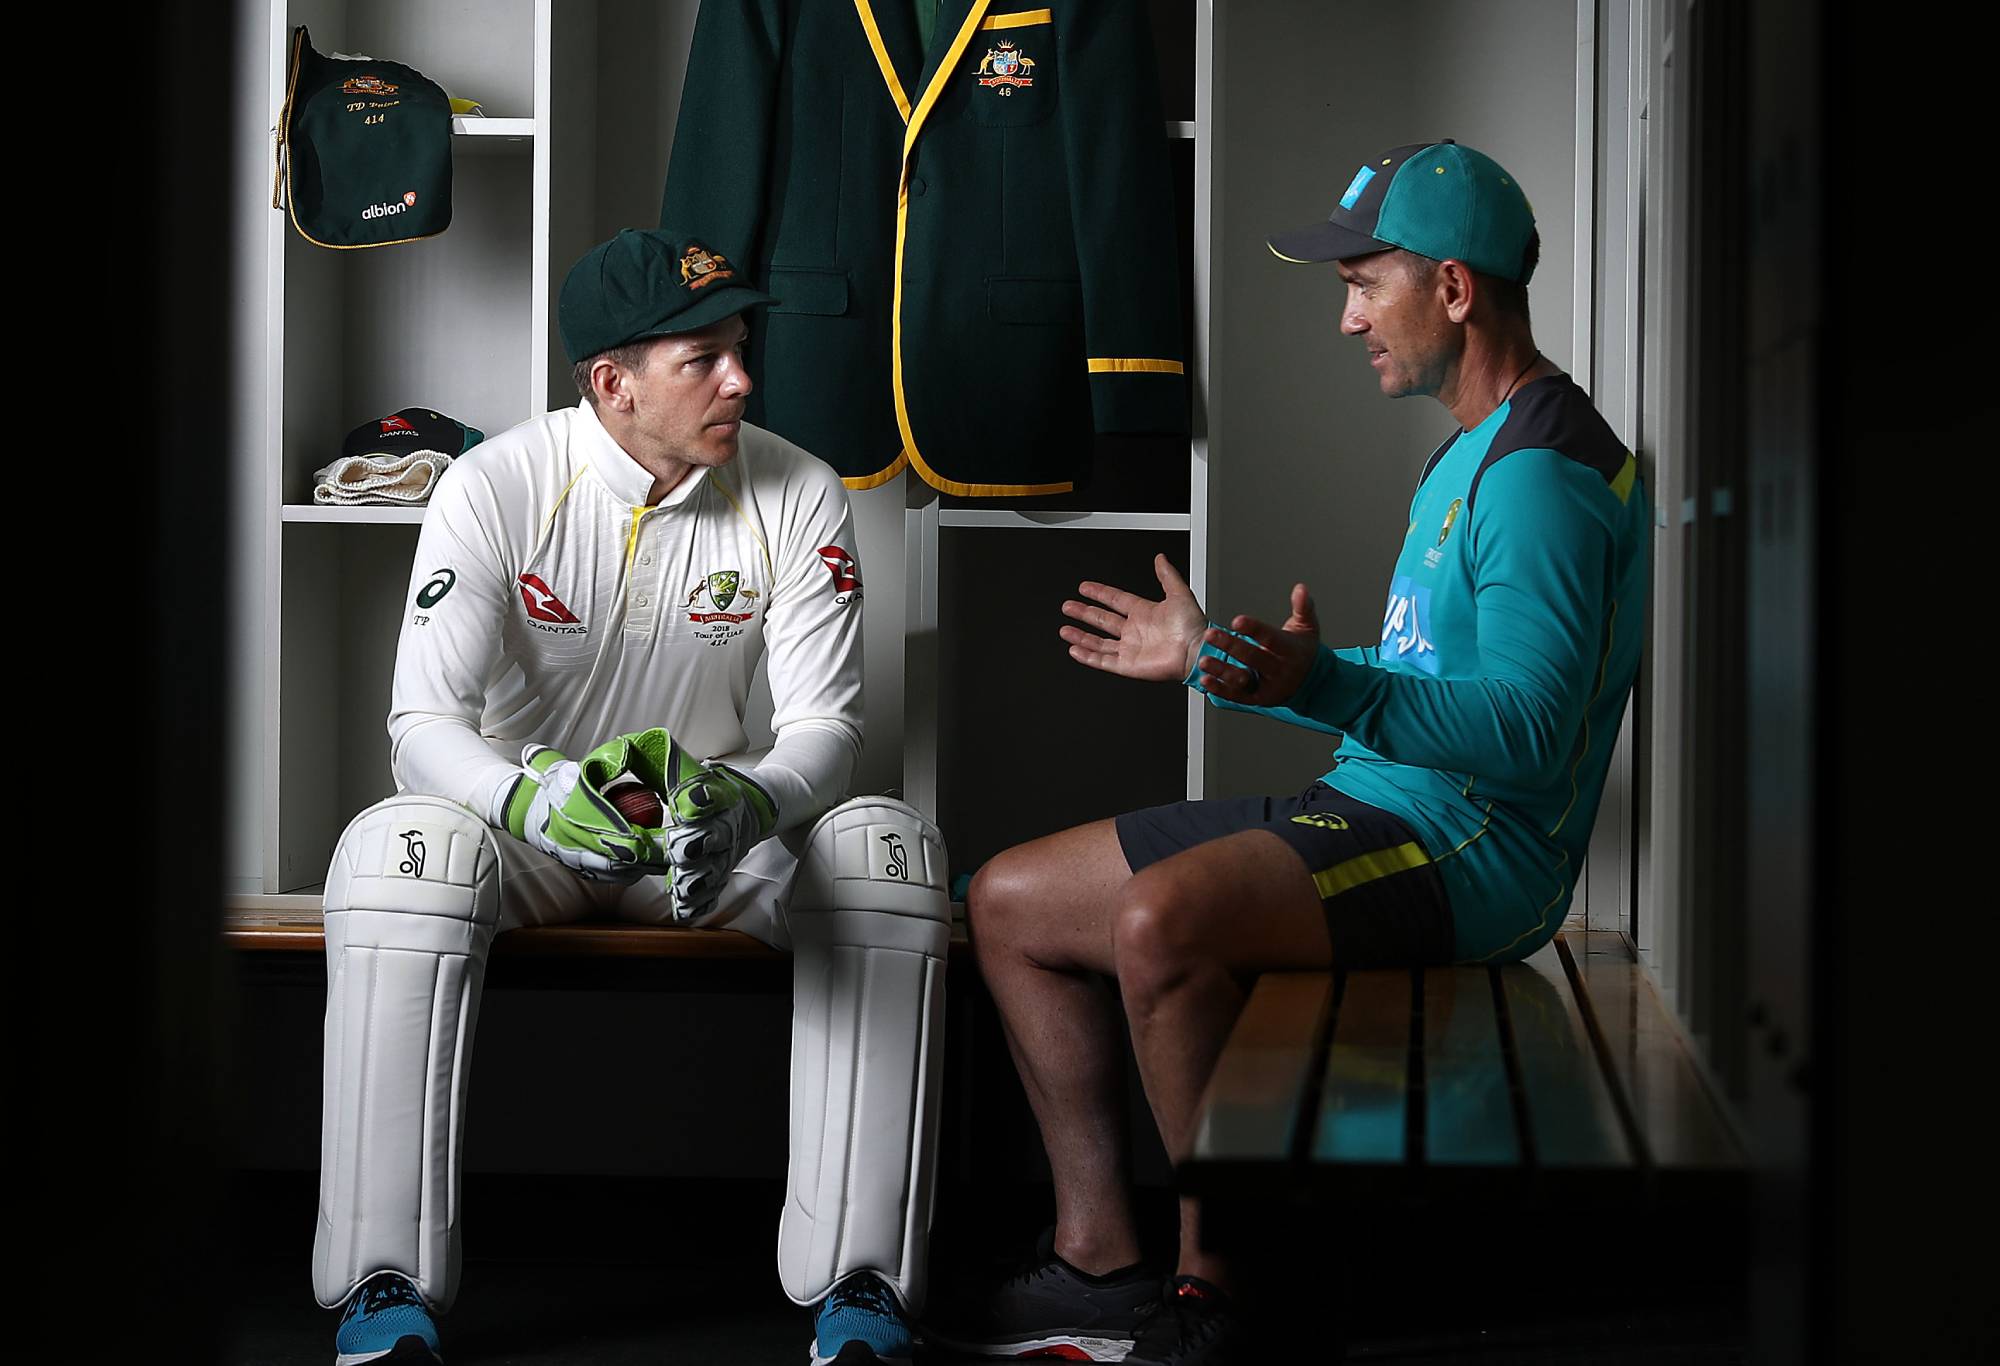 Australian Test cricket captain Tim Paine and Justin Langer, coach of Australia, pose during a portrait session at ICC Academy on October 05, 2018 in Dubai, United Arab Emirates. (Photo by Ryan Pierse/Getty Images)